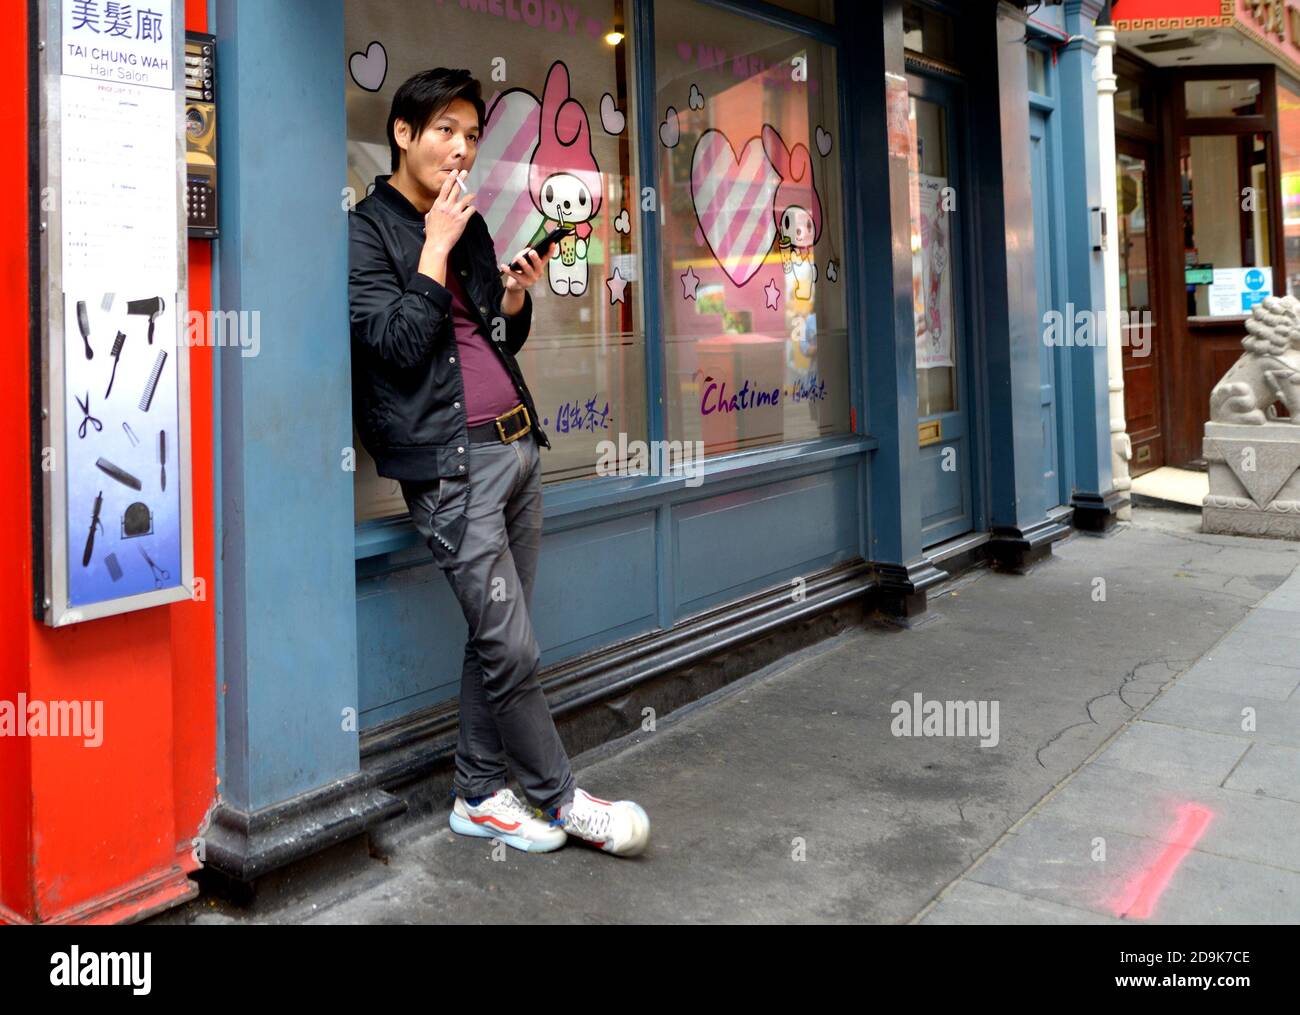 London, England, UK. Chinatown: Gerrard Street - young Chinese man looking at his mobile phone and smoking a cigarette Stock Photo